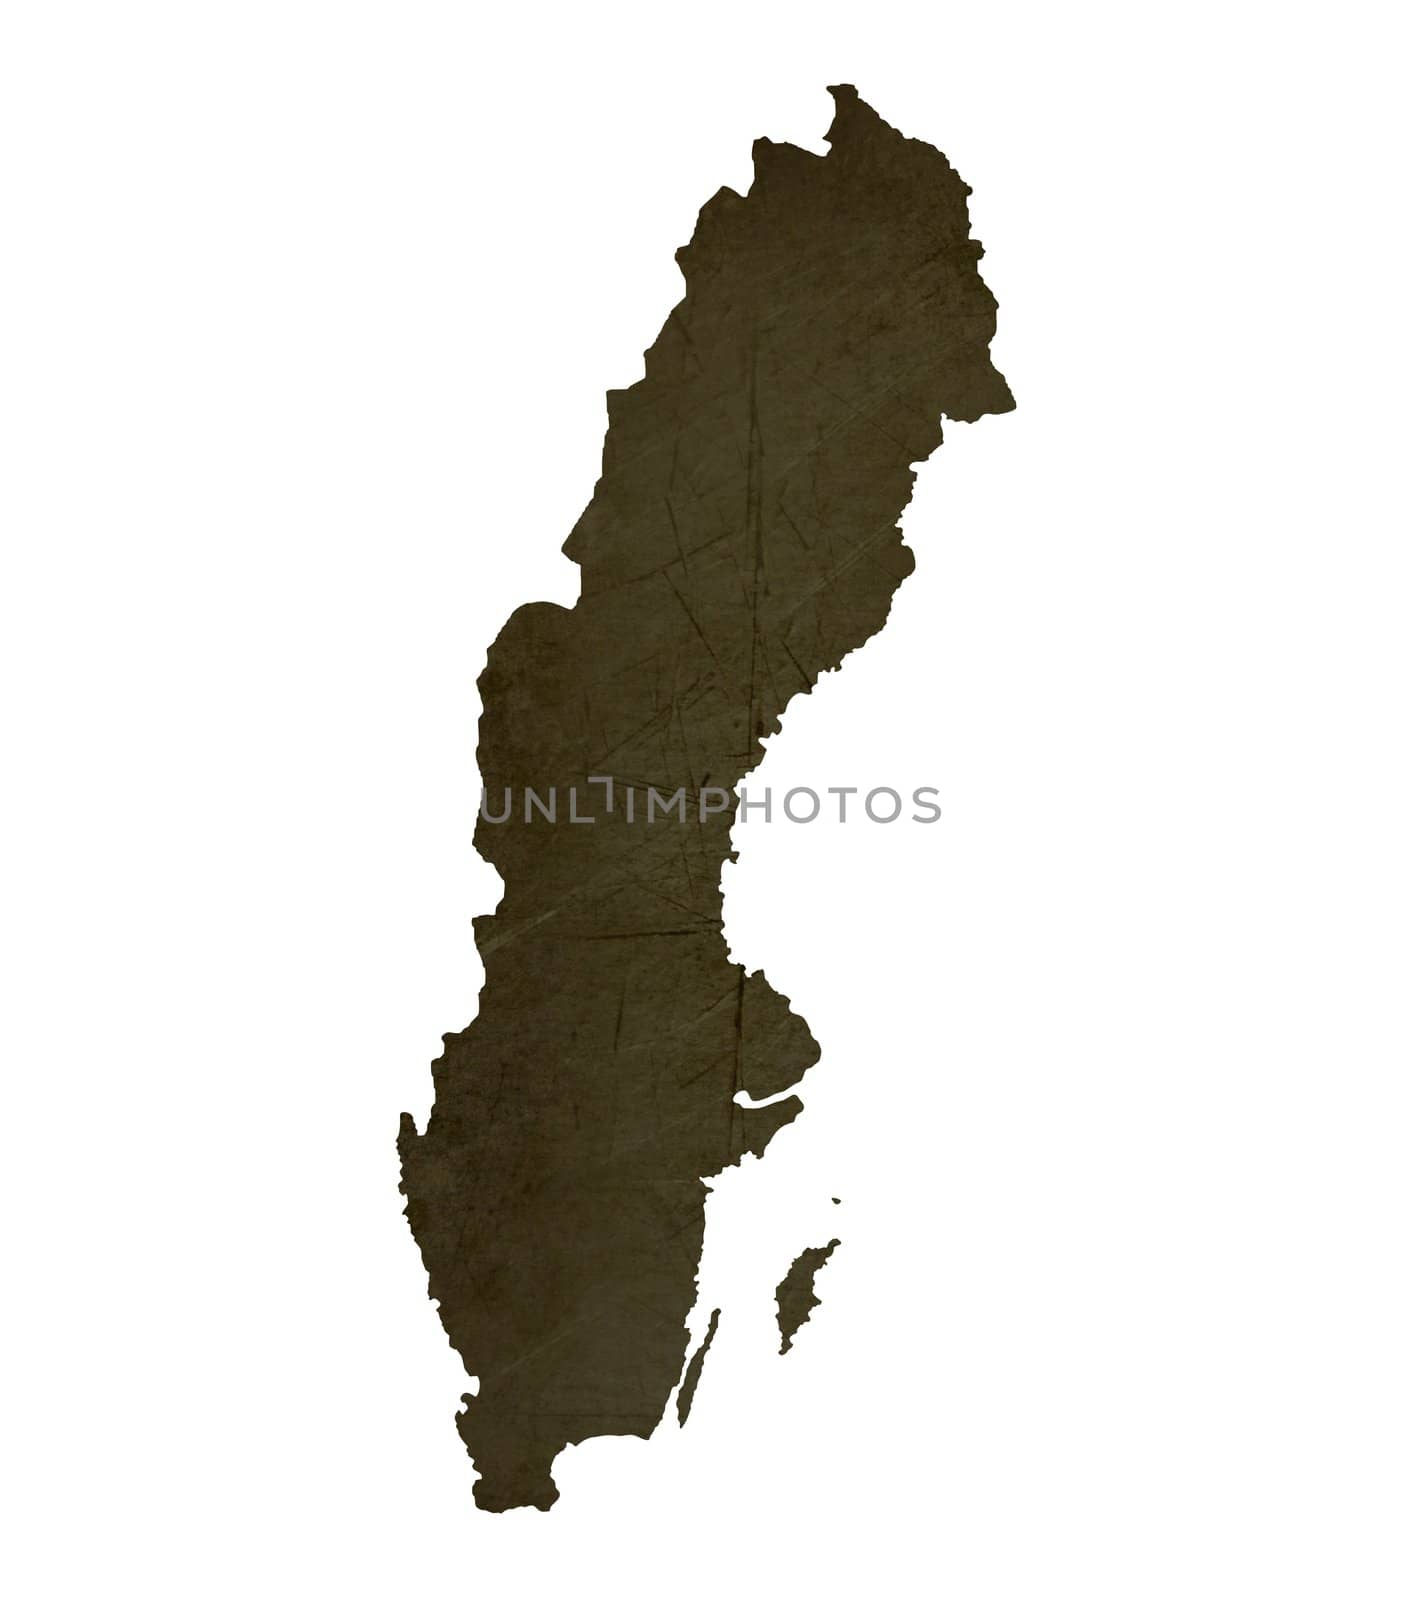 Dark silhouetted and textured map of Sweden isolated on white background.